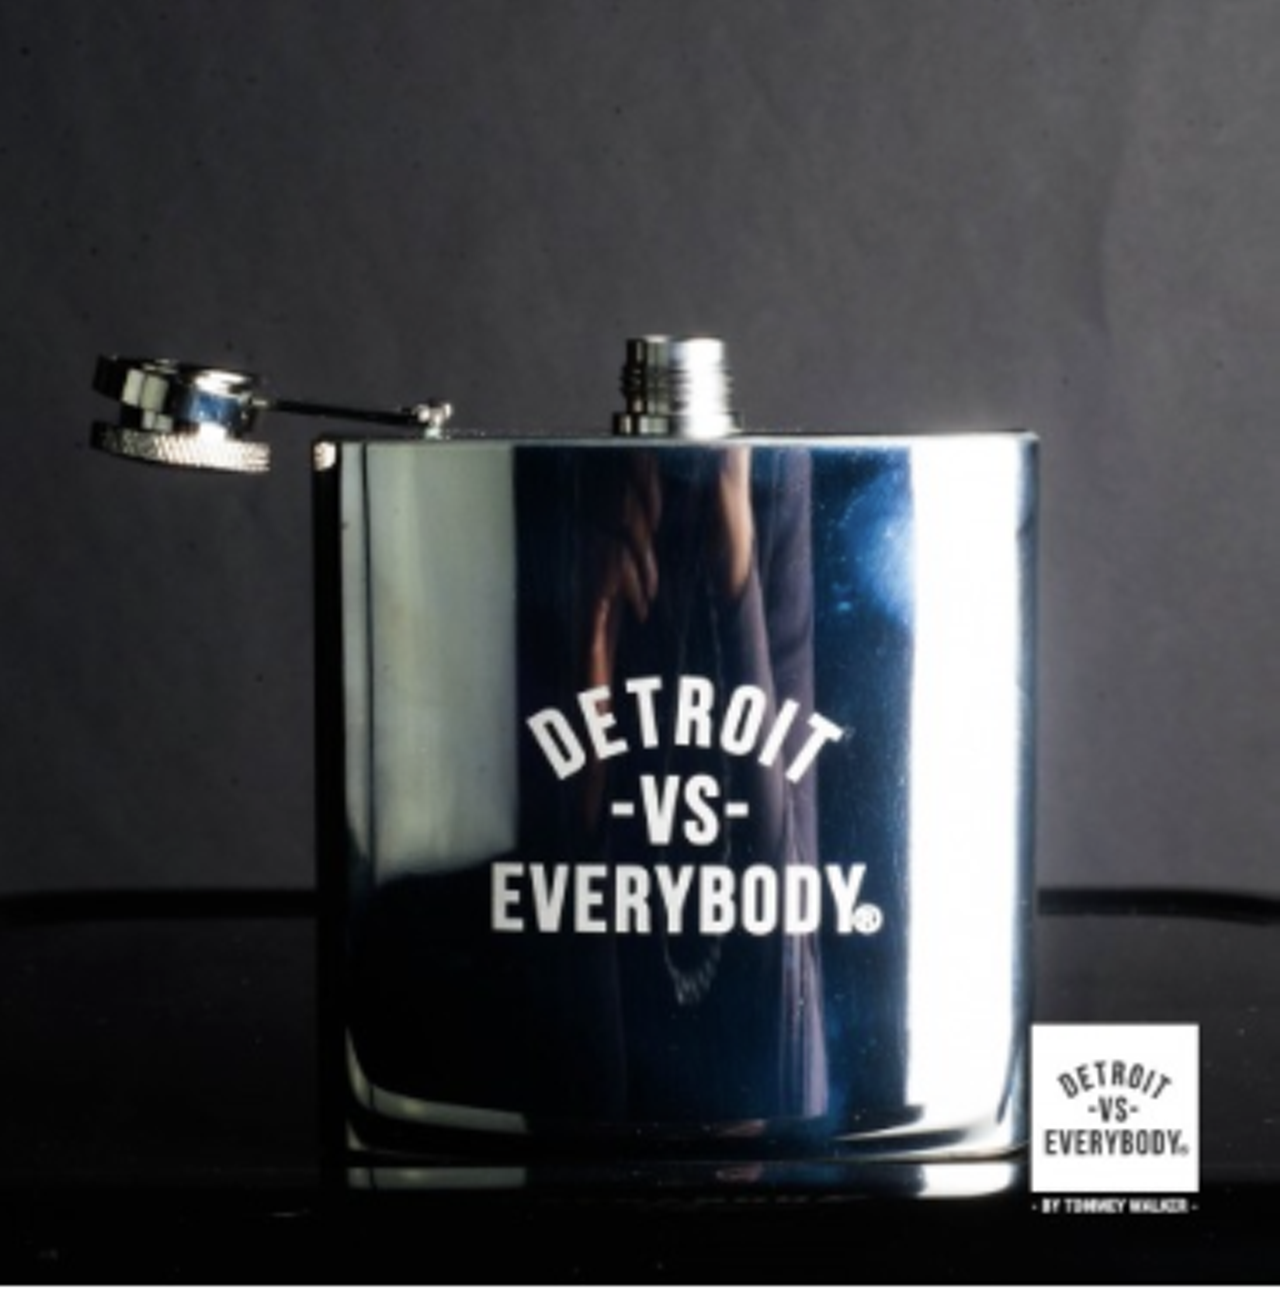 Detroit vs Everybody flask -- Give him the chance to show his local pride with this very practical gift. $44.99 (Detroit vs Everybody)